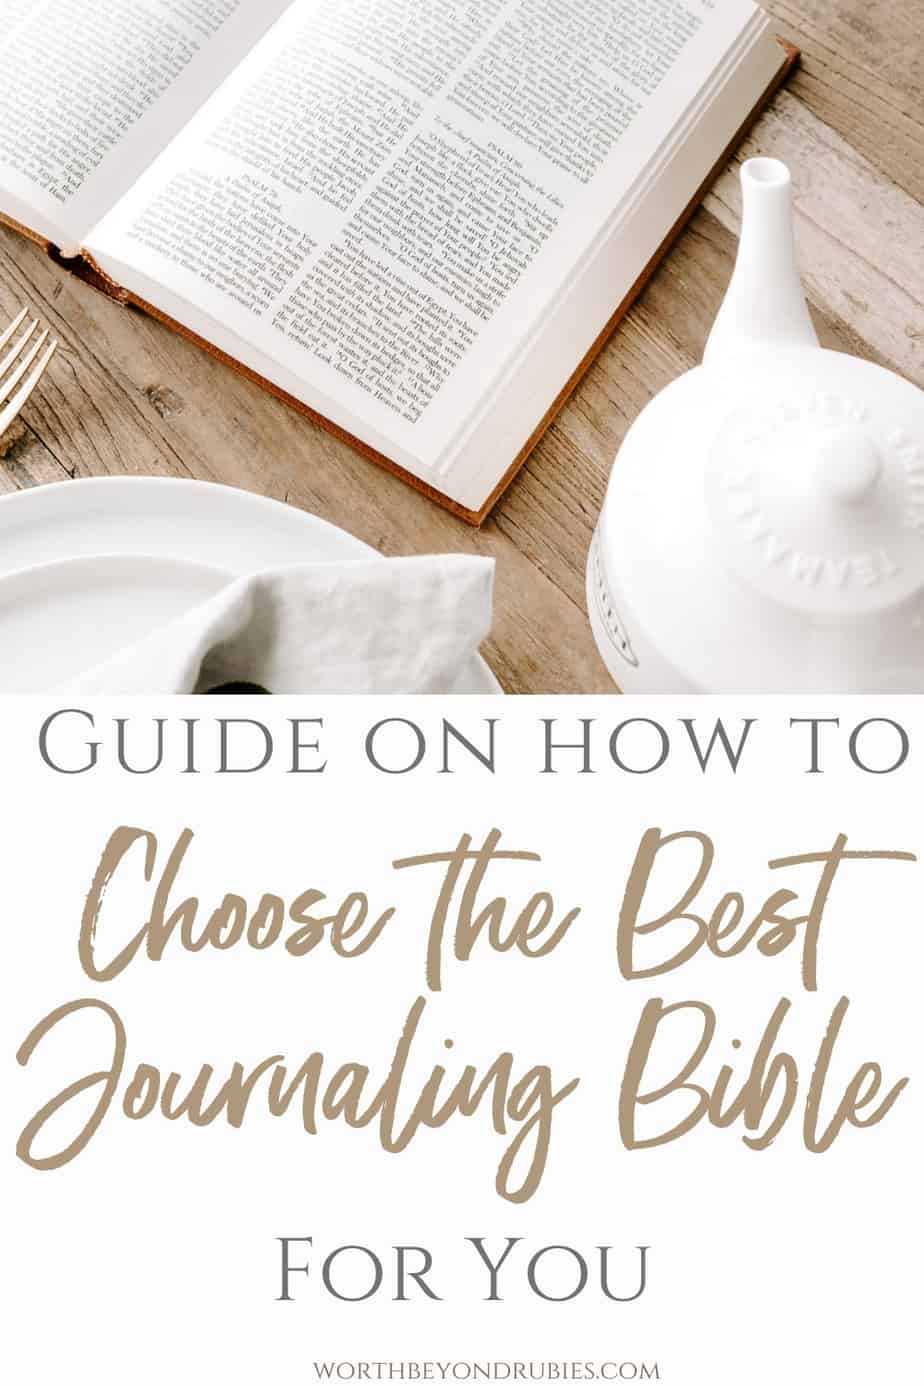 A Bible on a table with a tea kettle and text overlay that says Guide on How to Choose the Best Journaling Bible